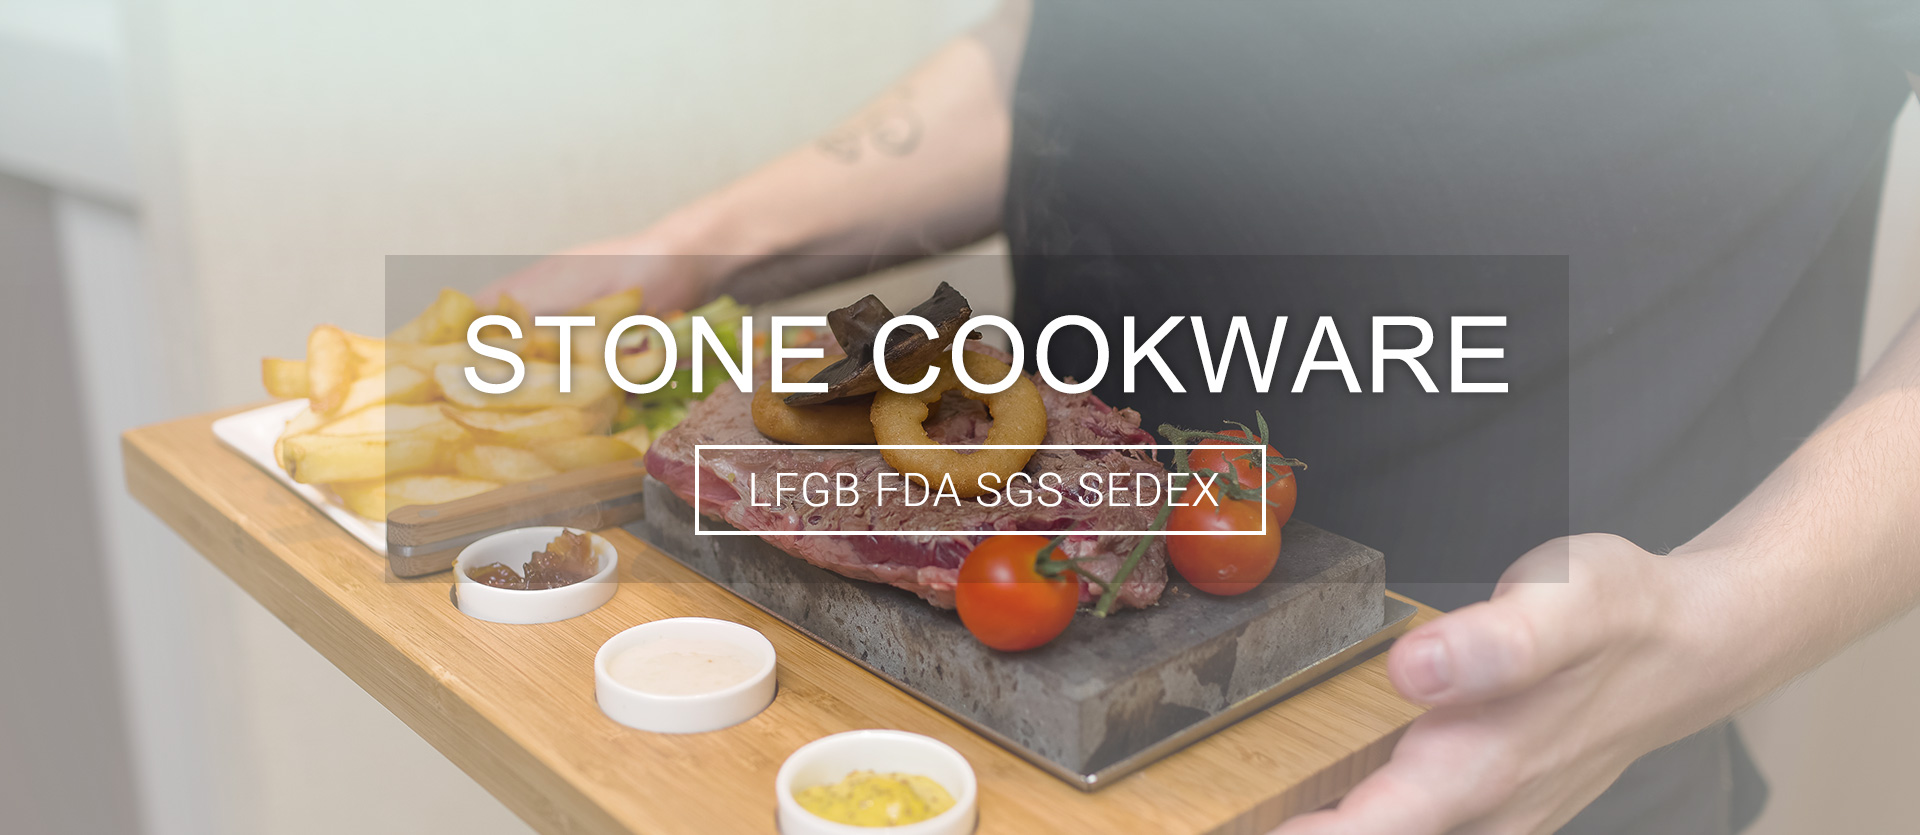 Stone Cookware 